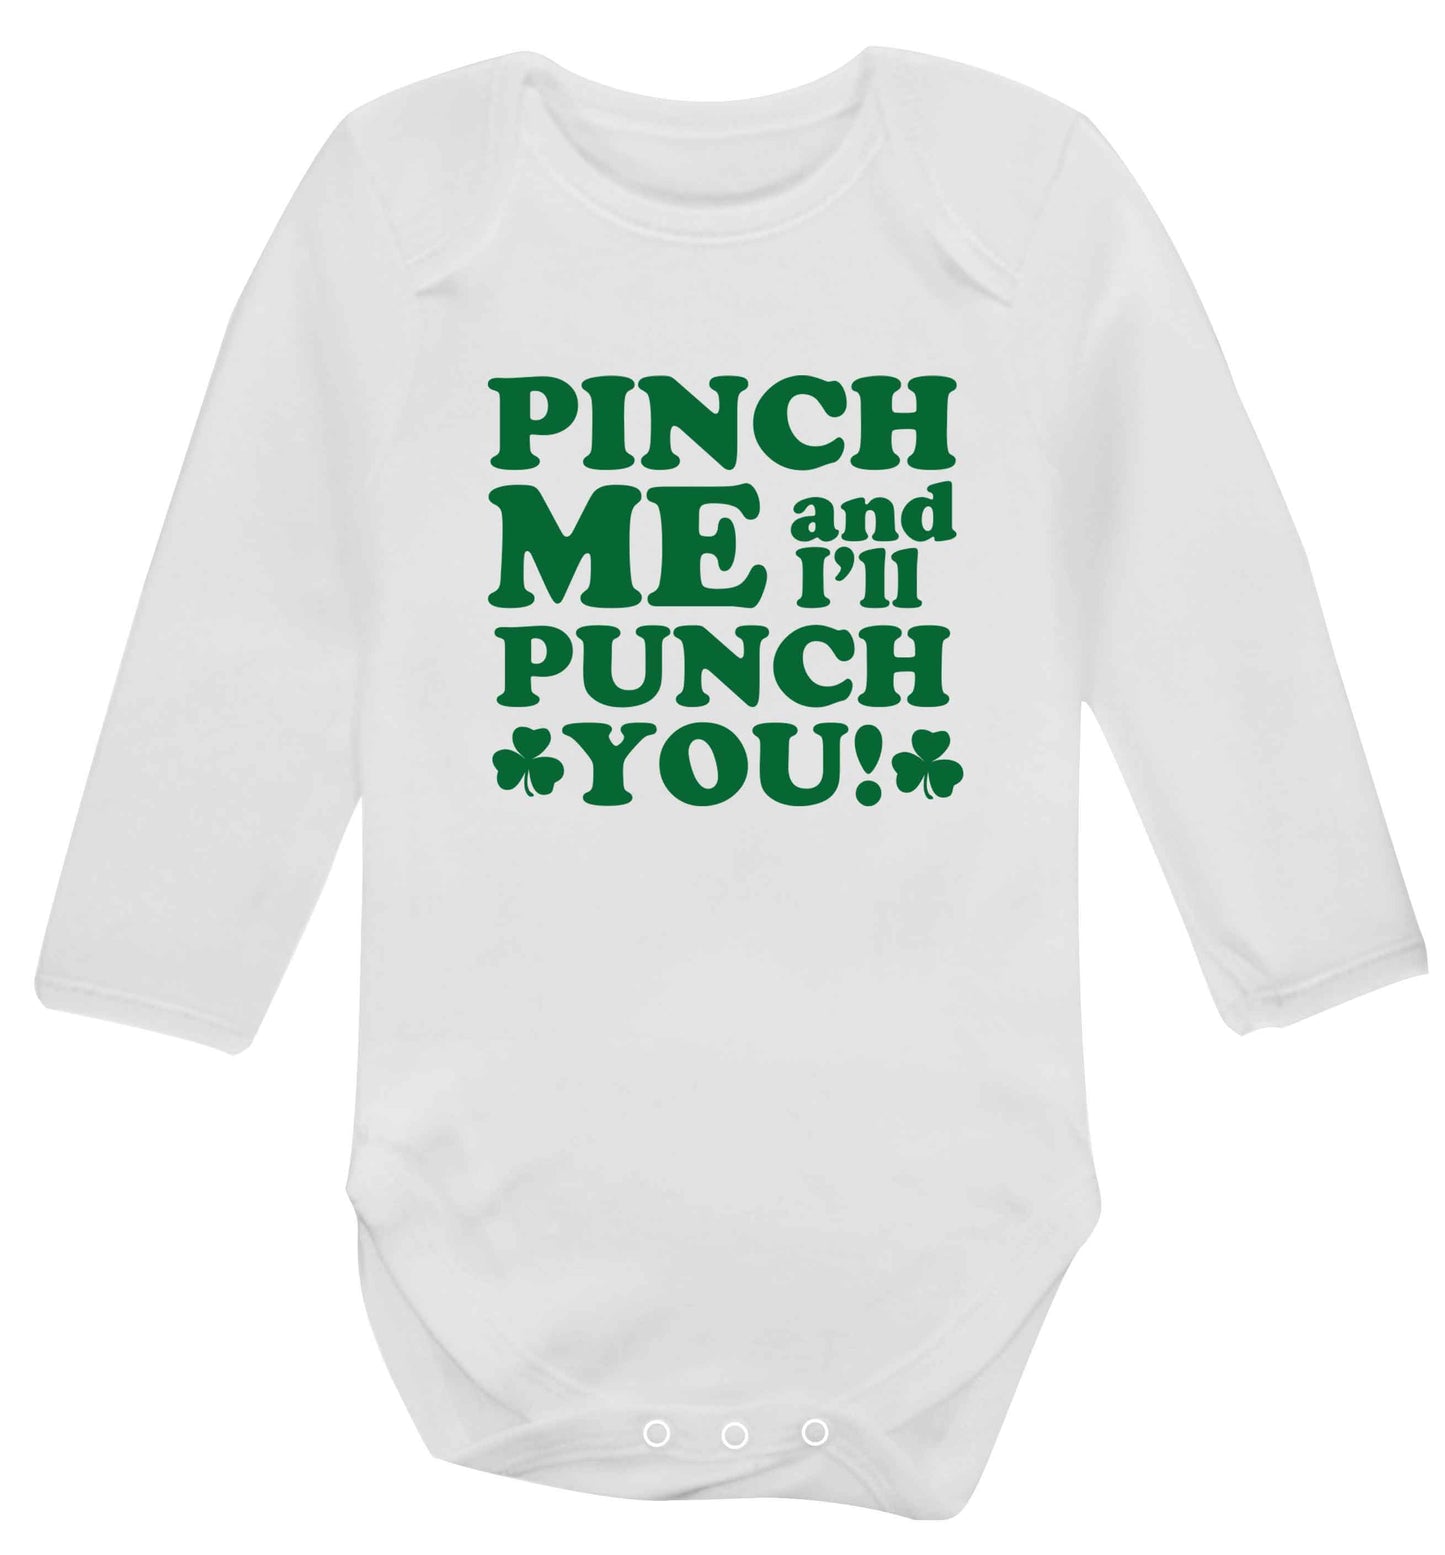 Pinch me and I'll punch you baby vest long sleeved white 6-12 months